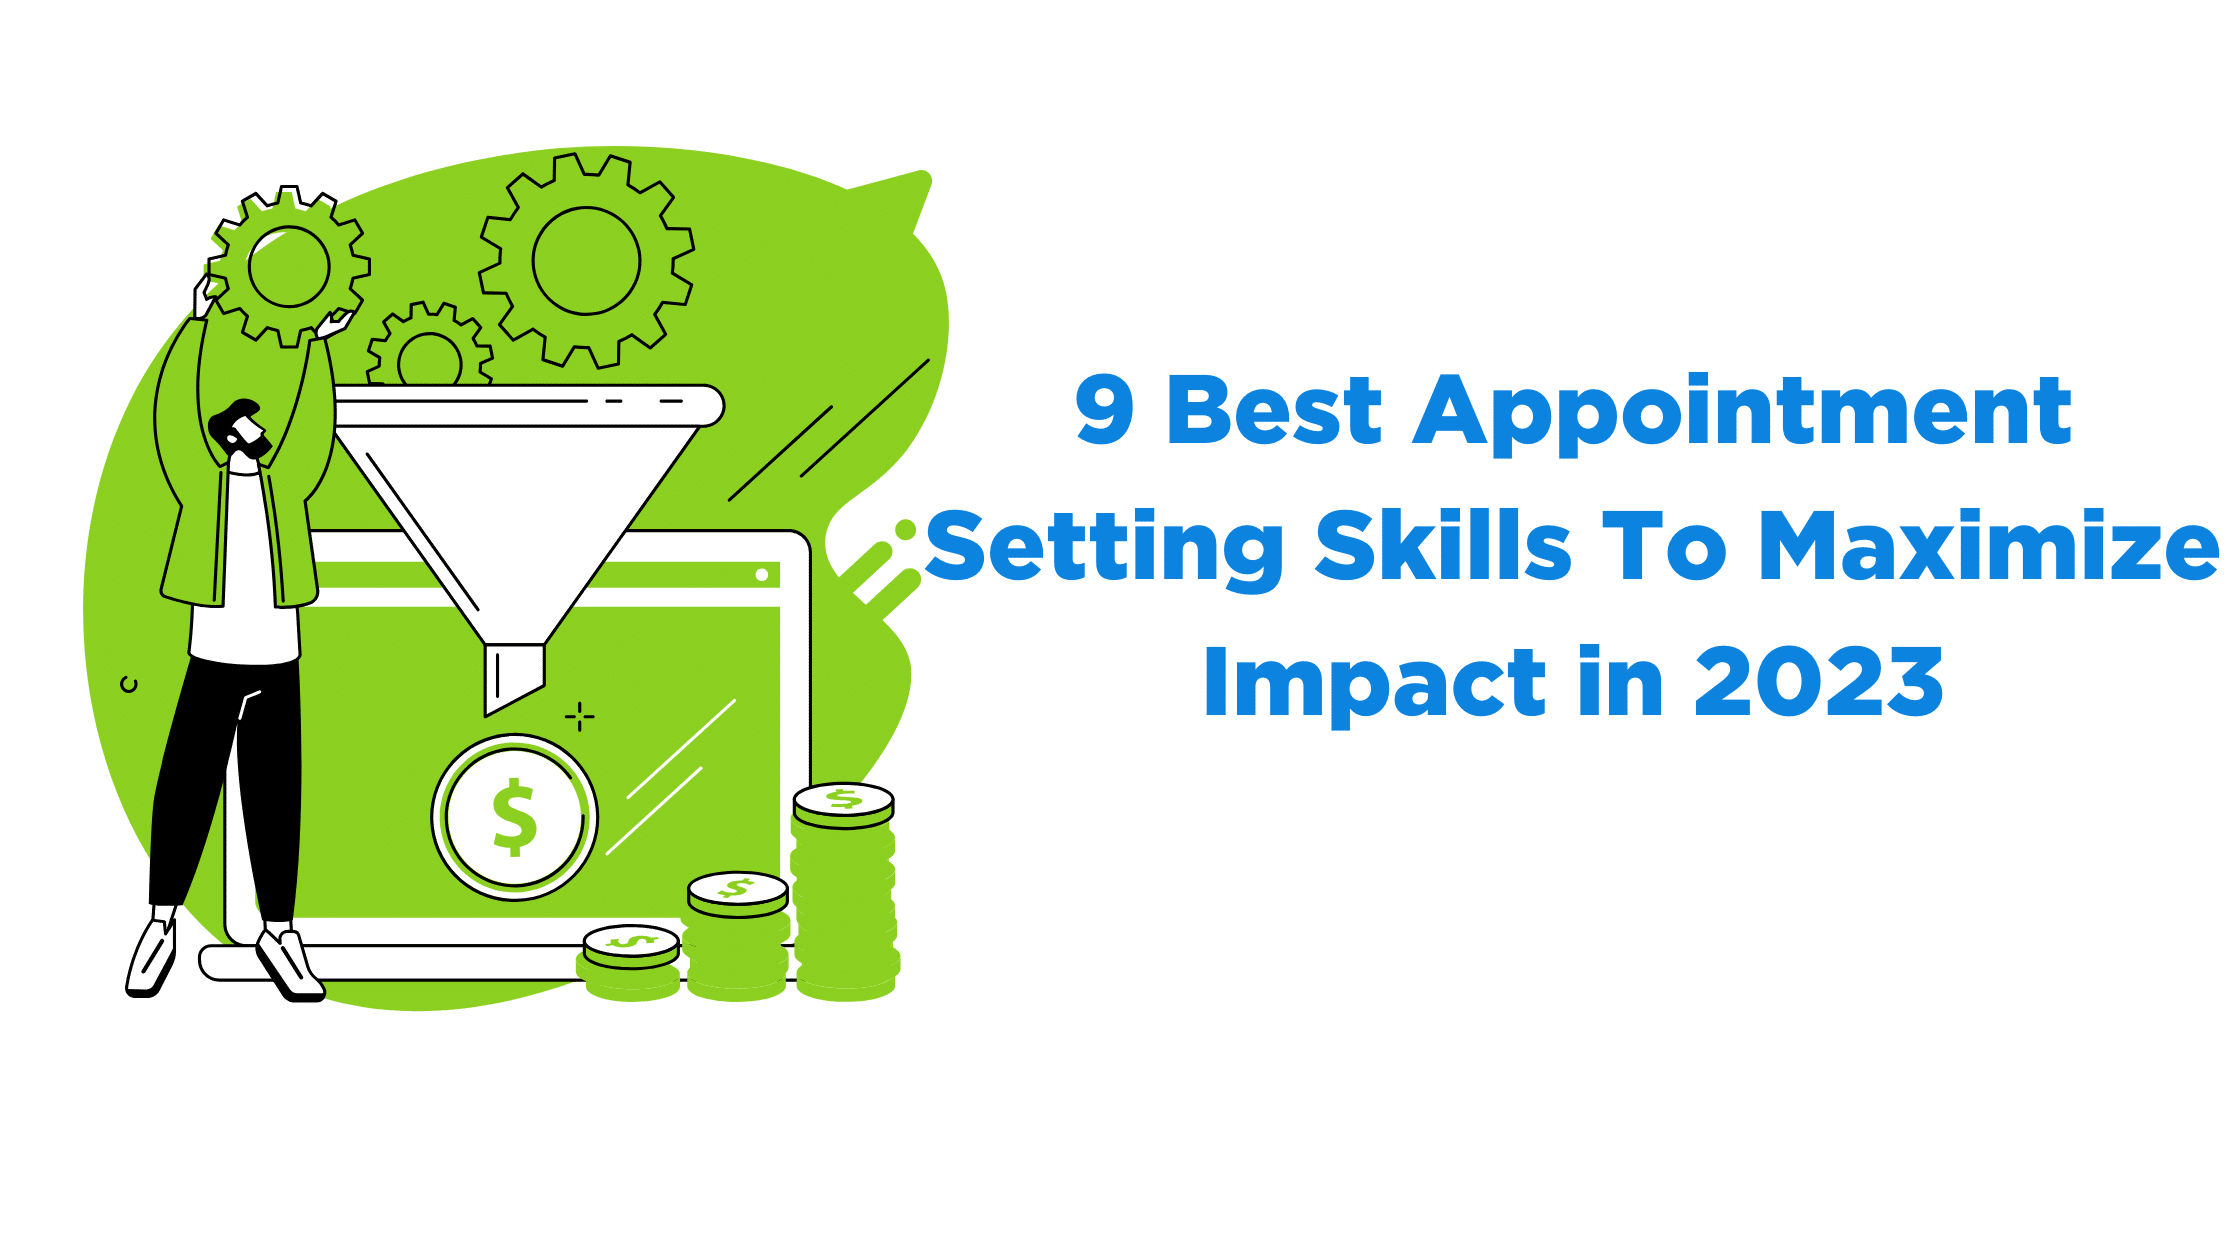 9 Best Appointment Setting Skills To Maximize Impact In 2023